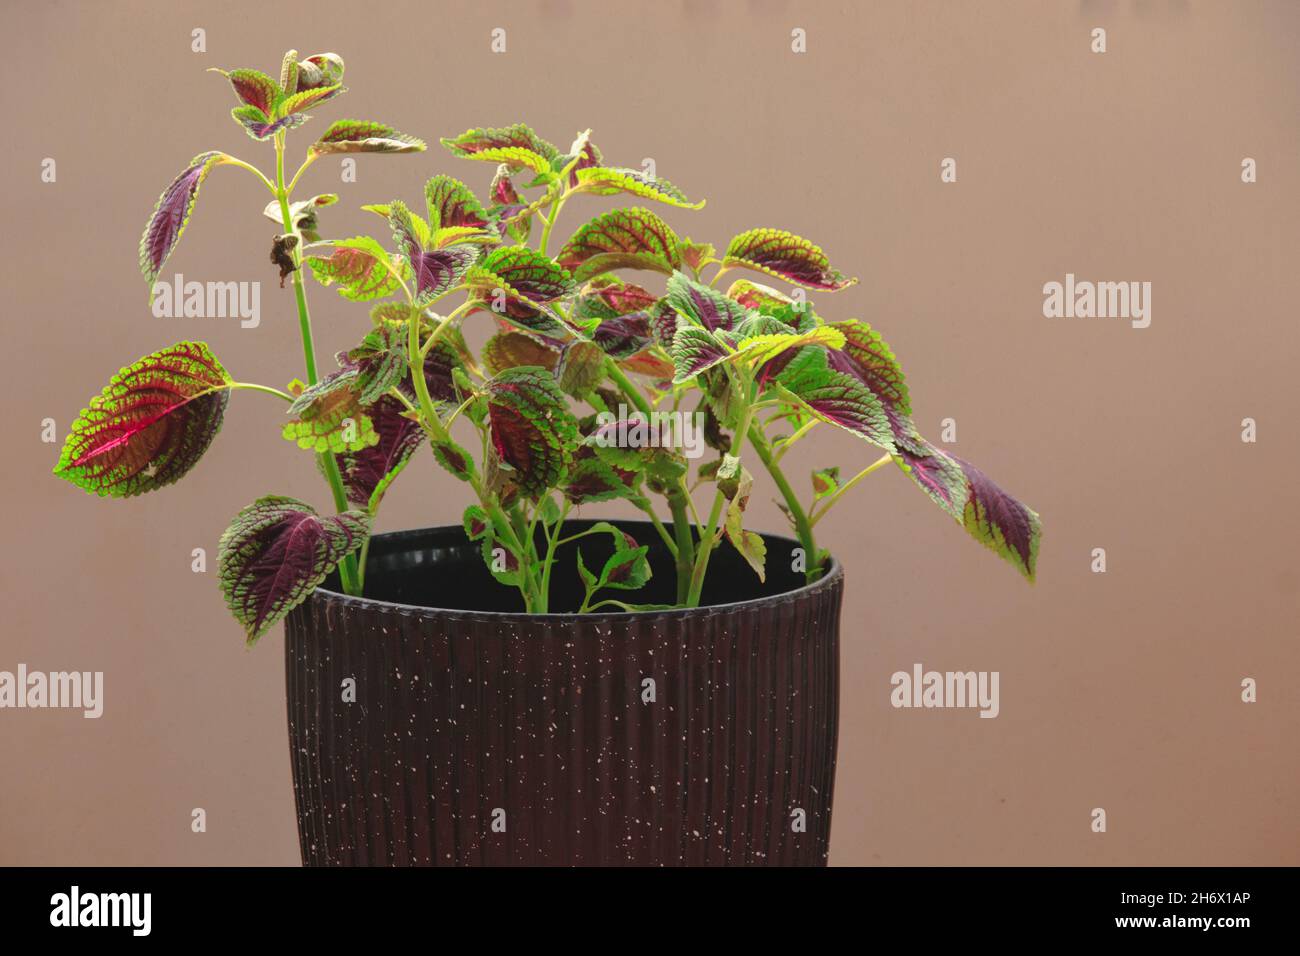 Coleus or Mayana (Coleus amboinicus) in a pot as herbal medicinal plant and a colorful houseplant for a relaxing home decor for Spring Stock Photo